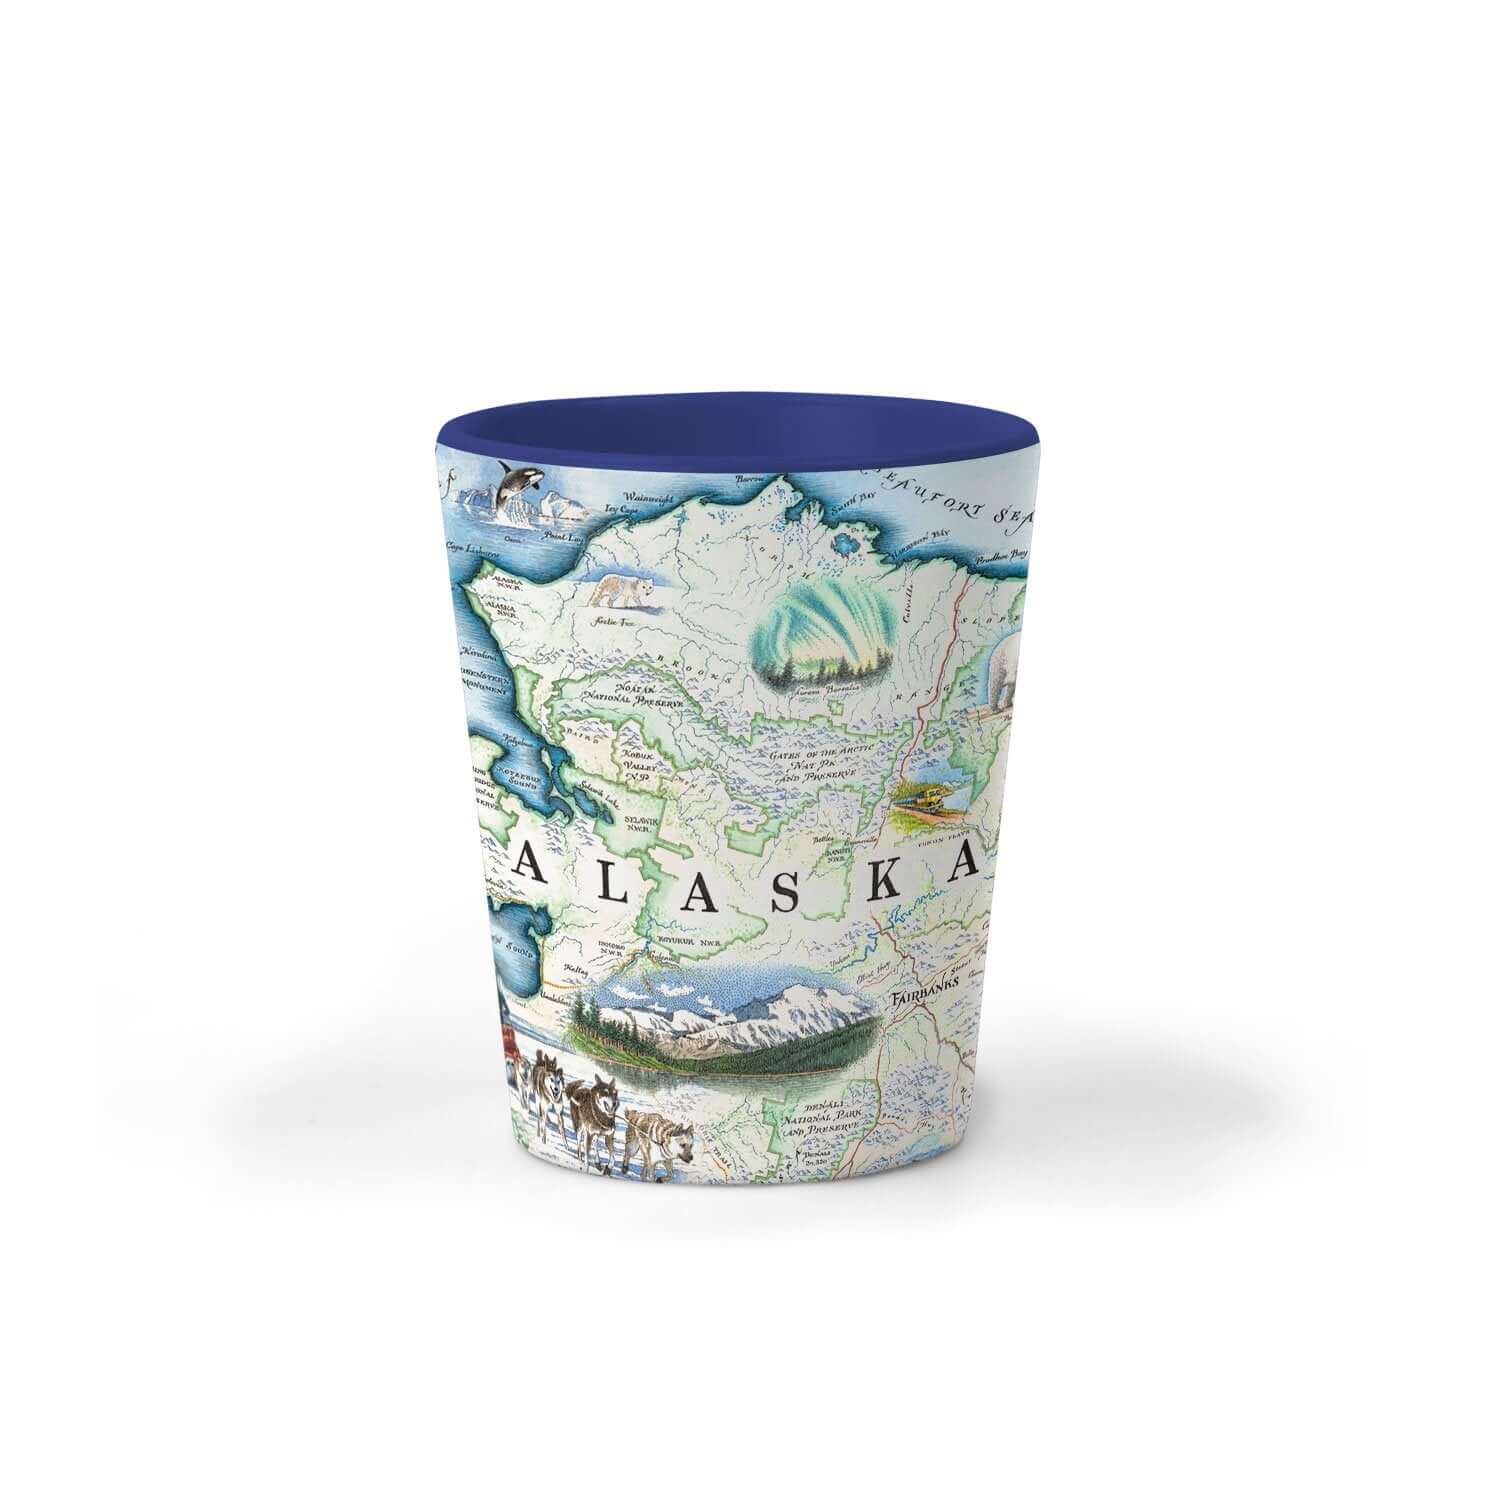 Alaska State map ceramic shot glass in earth tone colors of blues and greens. The Map features Anchorage, Juneau, Fair Banks, Denali National Park, Iditarod Trail Sled Dog Race, bears, elk, moose, whales, a mountain goat & a sheep.  